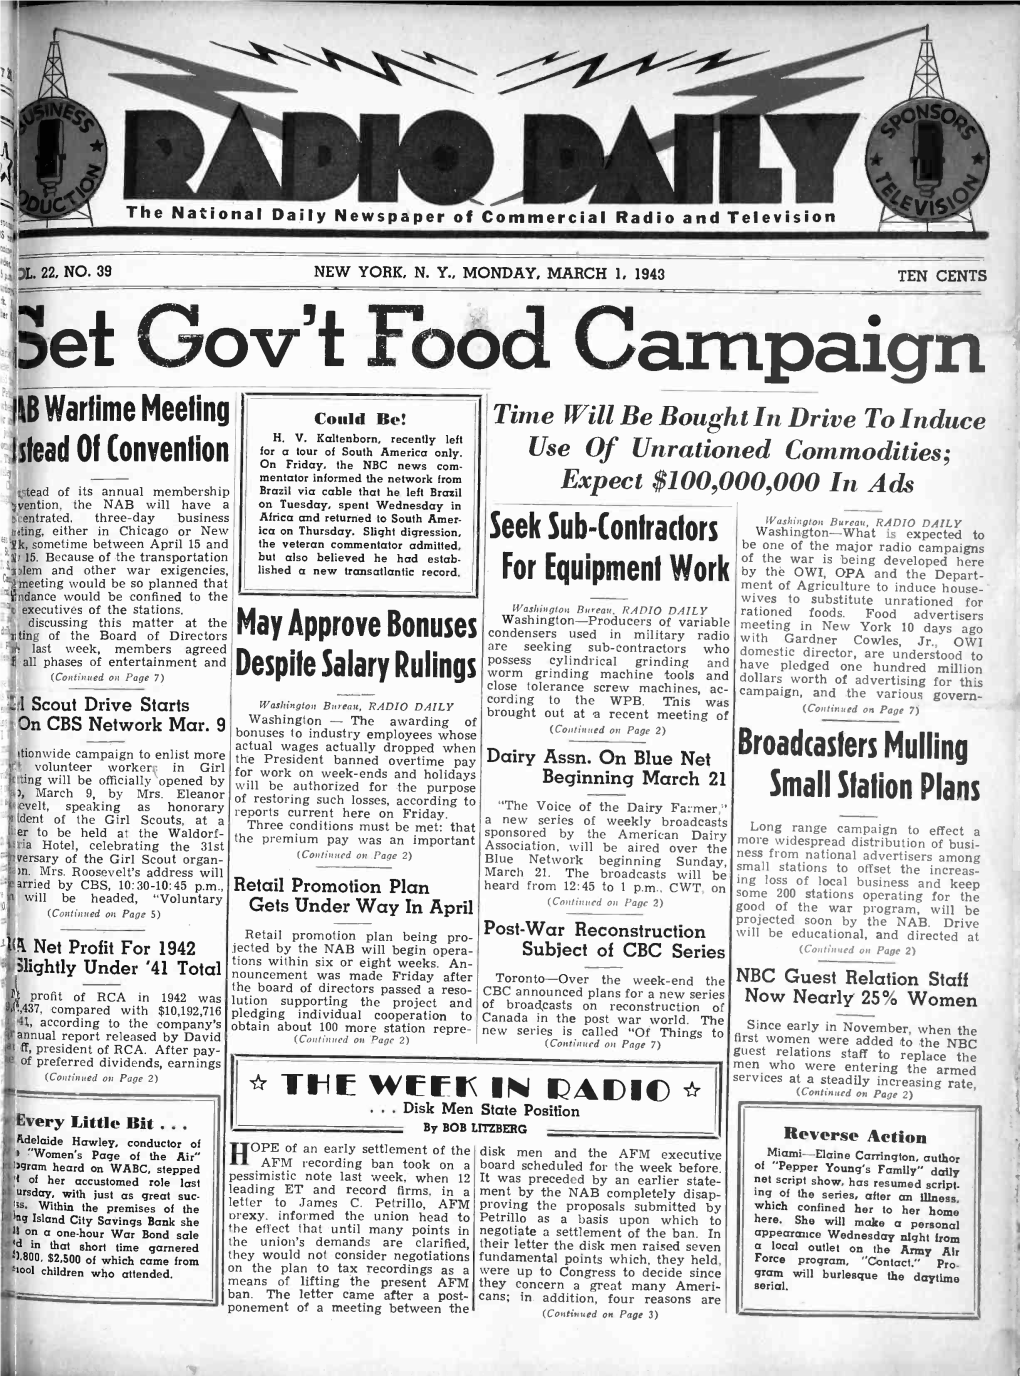 MARCH 1, 1943 TEN CENTS ;Yet Gov't Food Campaign IIB Wartime Meeting Could Be: Time Will Be Bought in Drive to Induce H